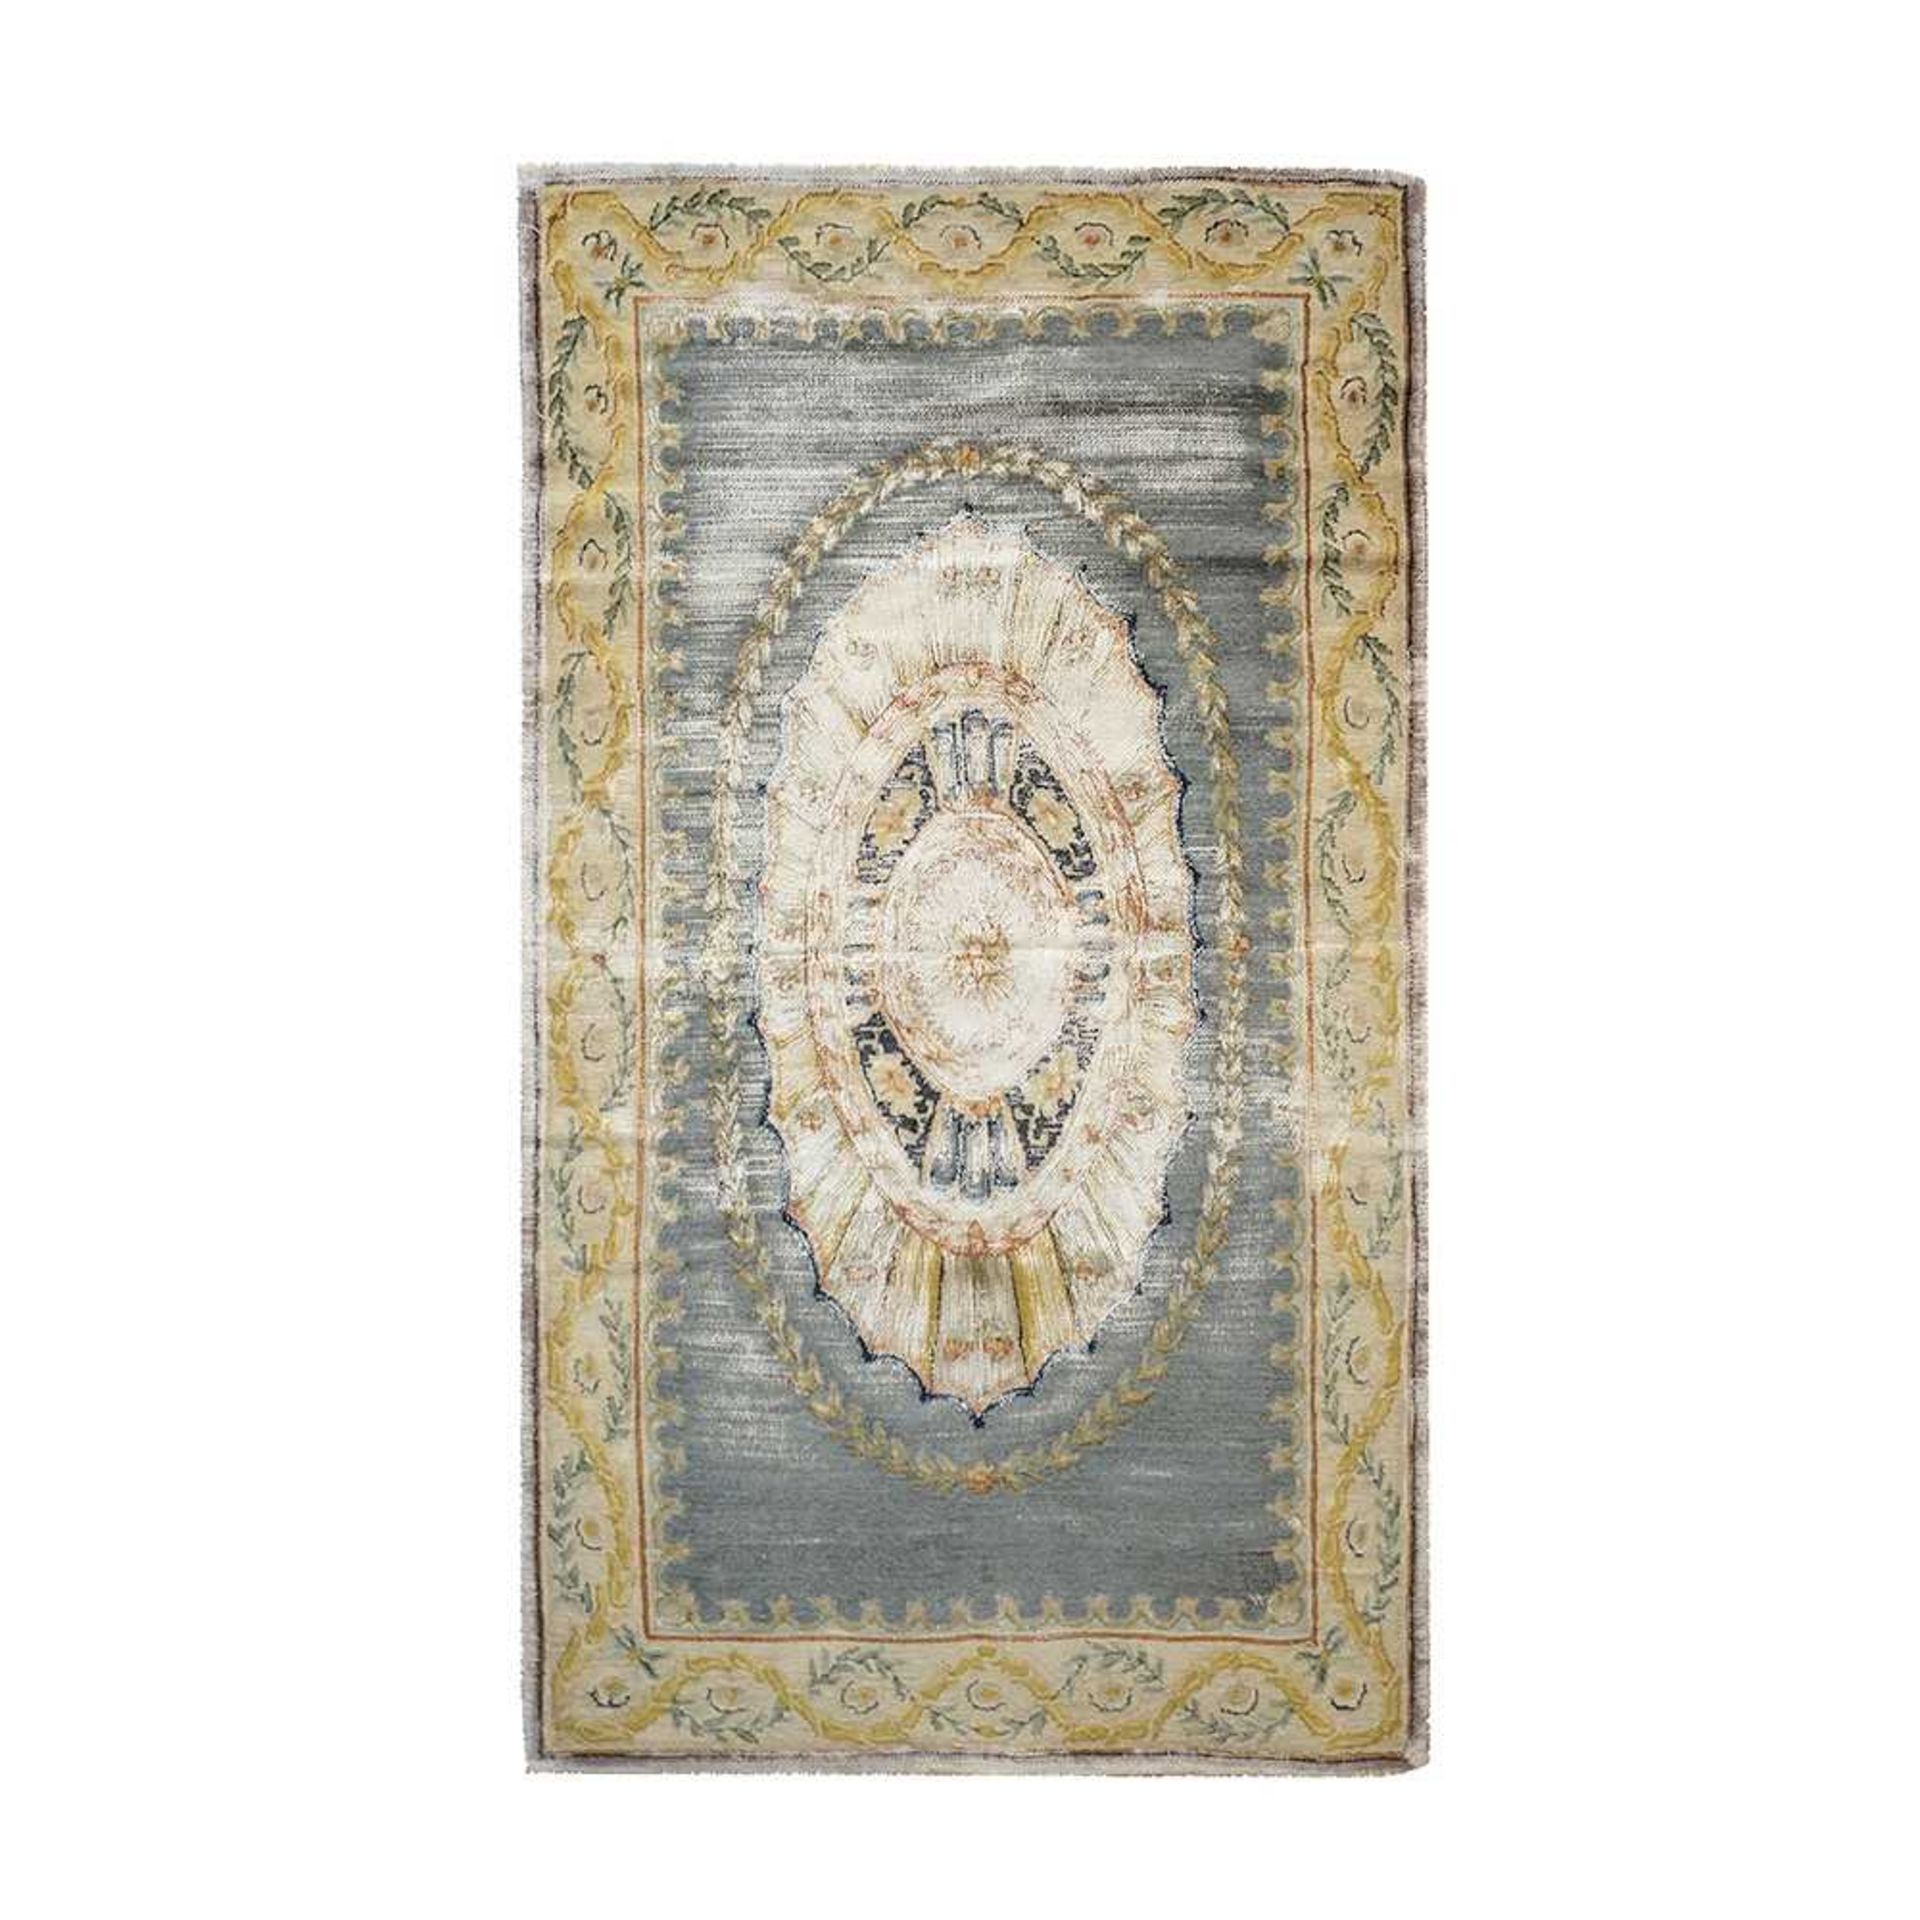 A LATE 18TH / EARLY 19TH CENTURY FRENCH CARPET